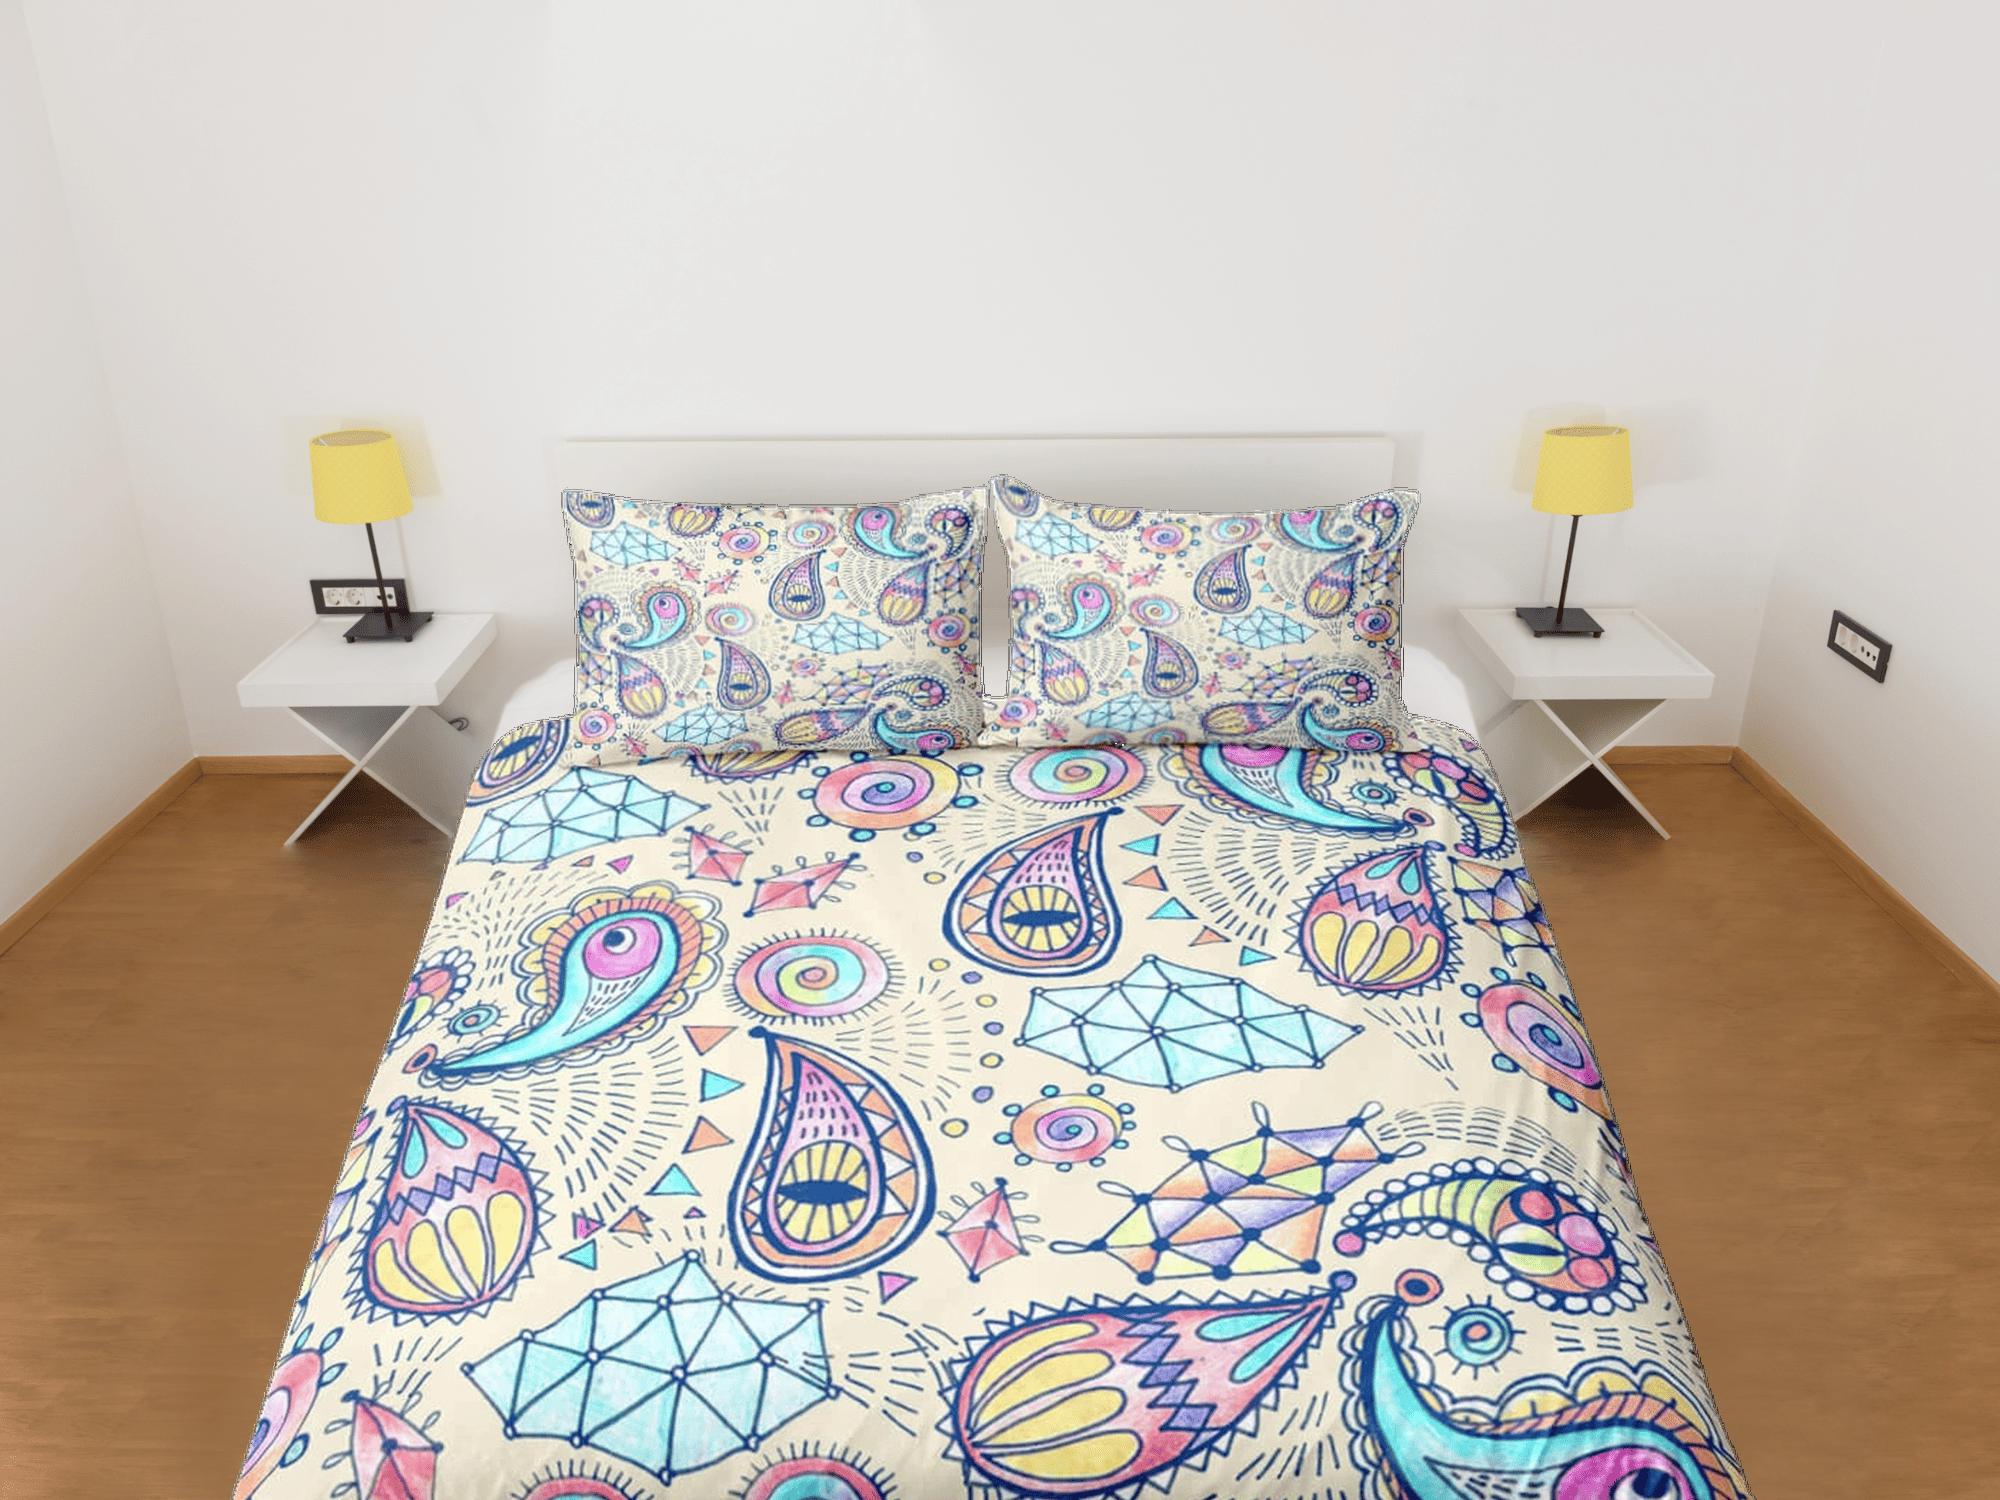 daintyduvet Paisley duvet cover set in pastel colors, aesthetic room decor bedding set full, king, queen size, abstract boho bedspread, luxury bed cover